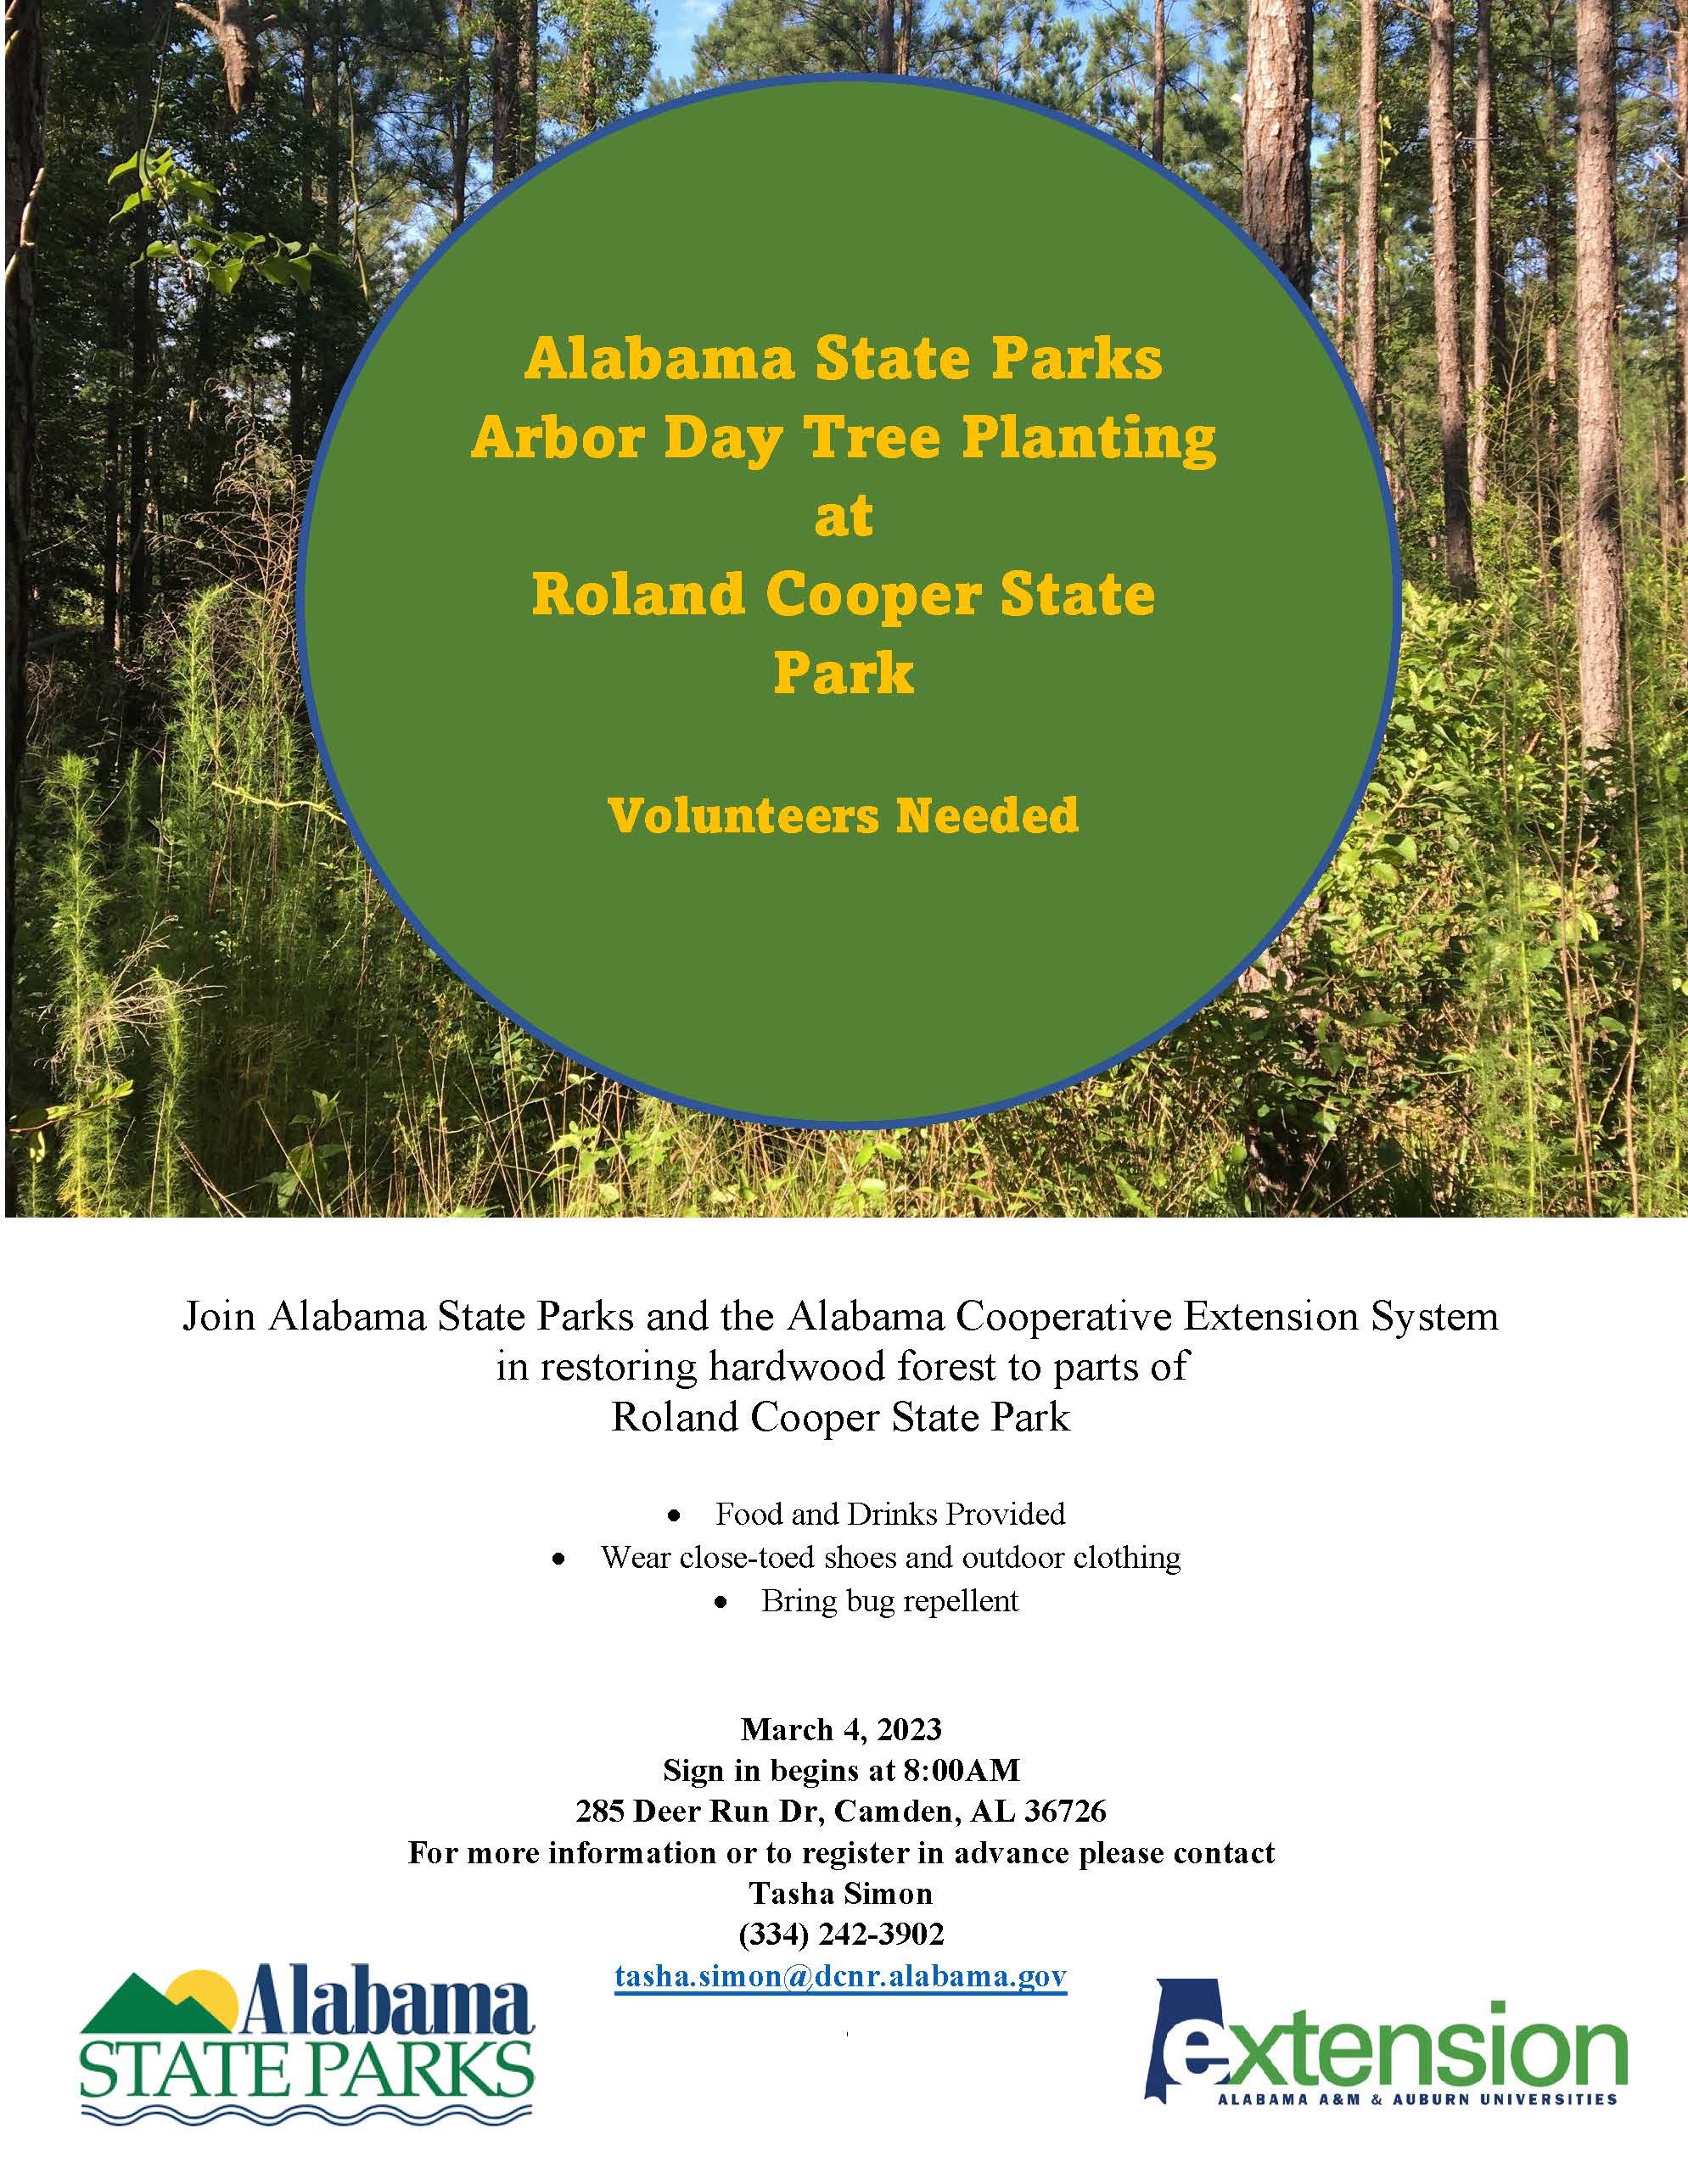 Roland Cooper State Park Arbor Day Tree Planting